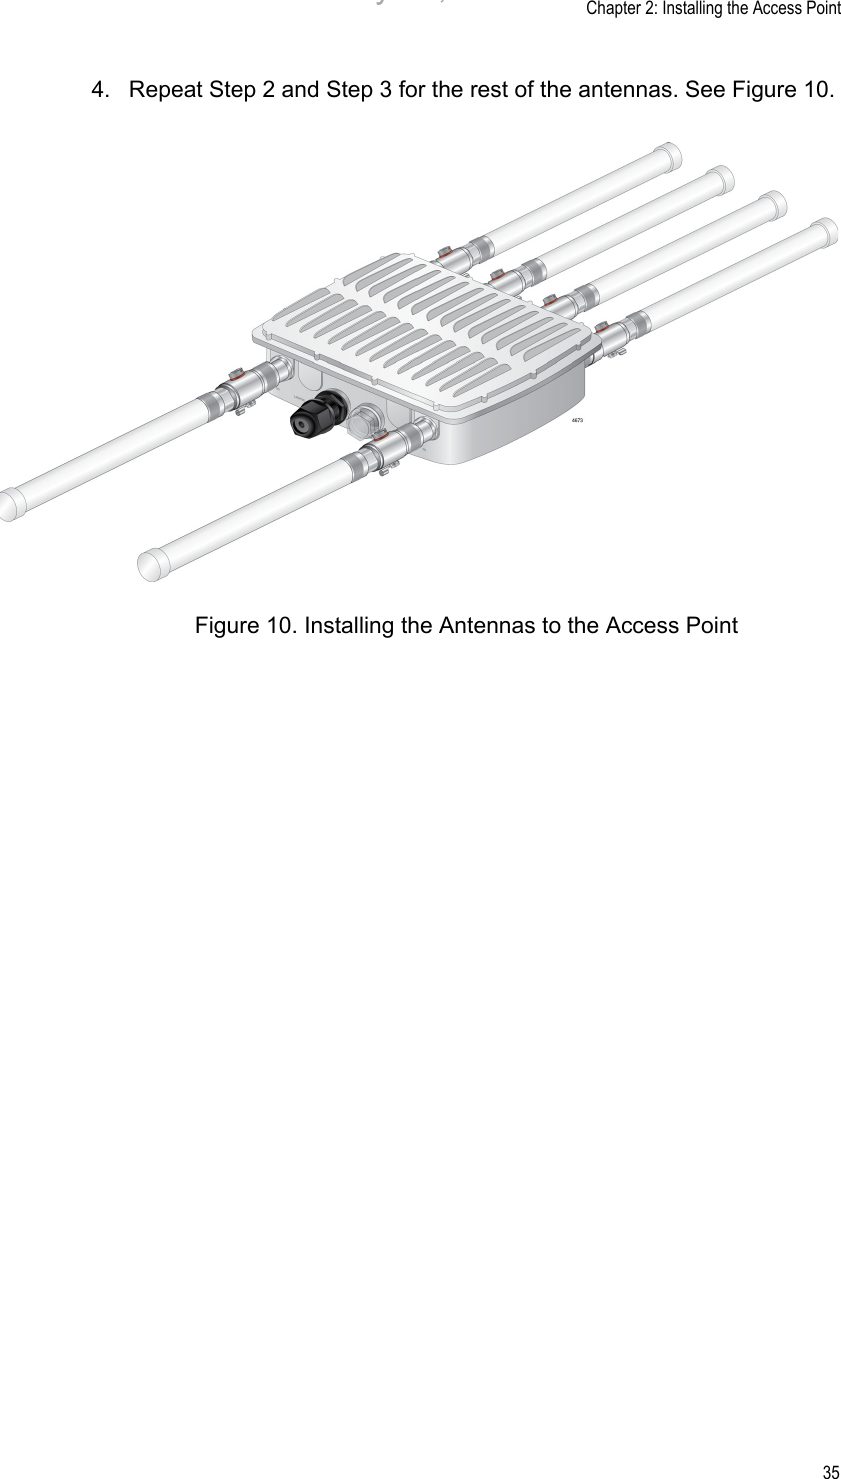 Chapter 2: Installing the Access Point354. Repeat Step 2 and Step 3 for the rest of the antennas. See Figure 10.Figure 10. Installing the Antennas to the Access PointDraft 5 on February 14, 2019